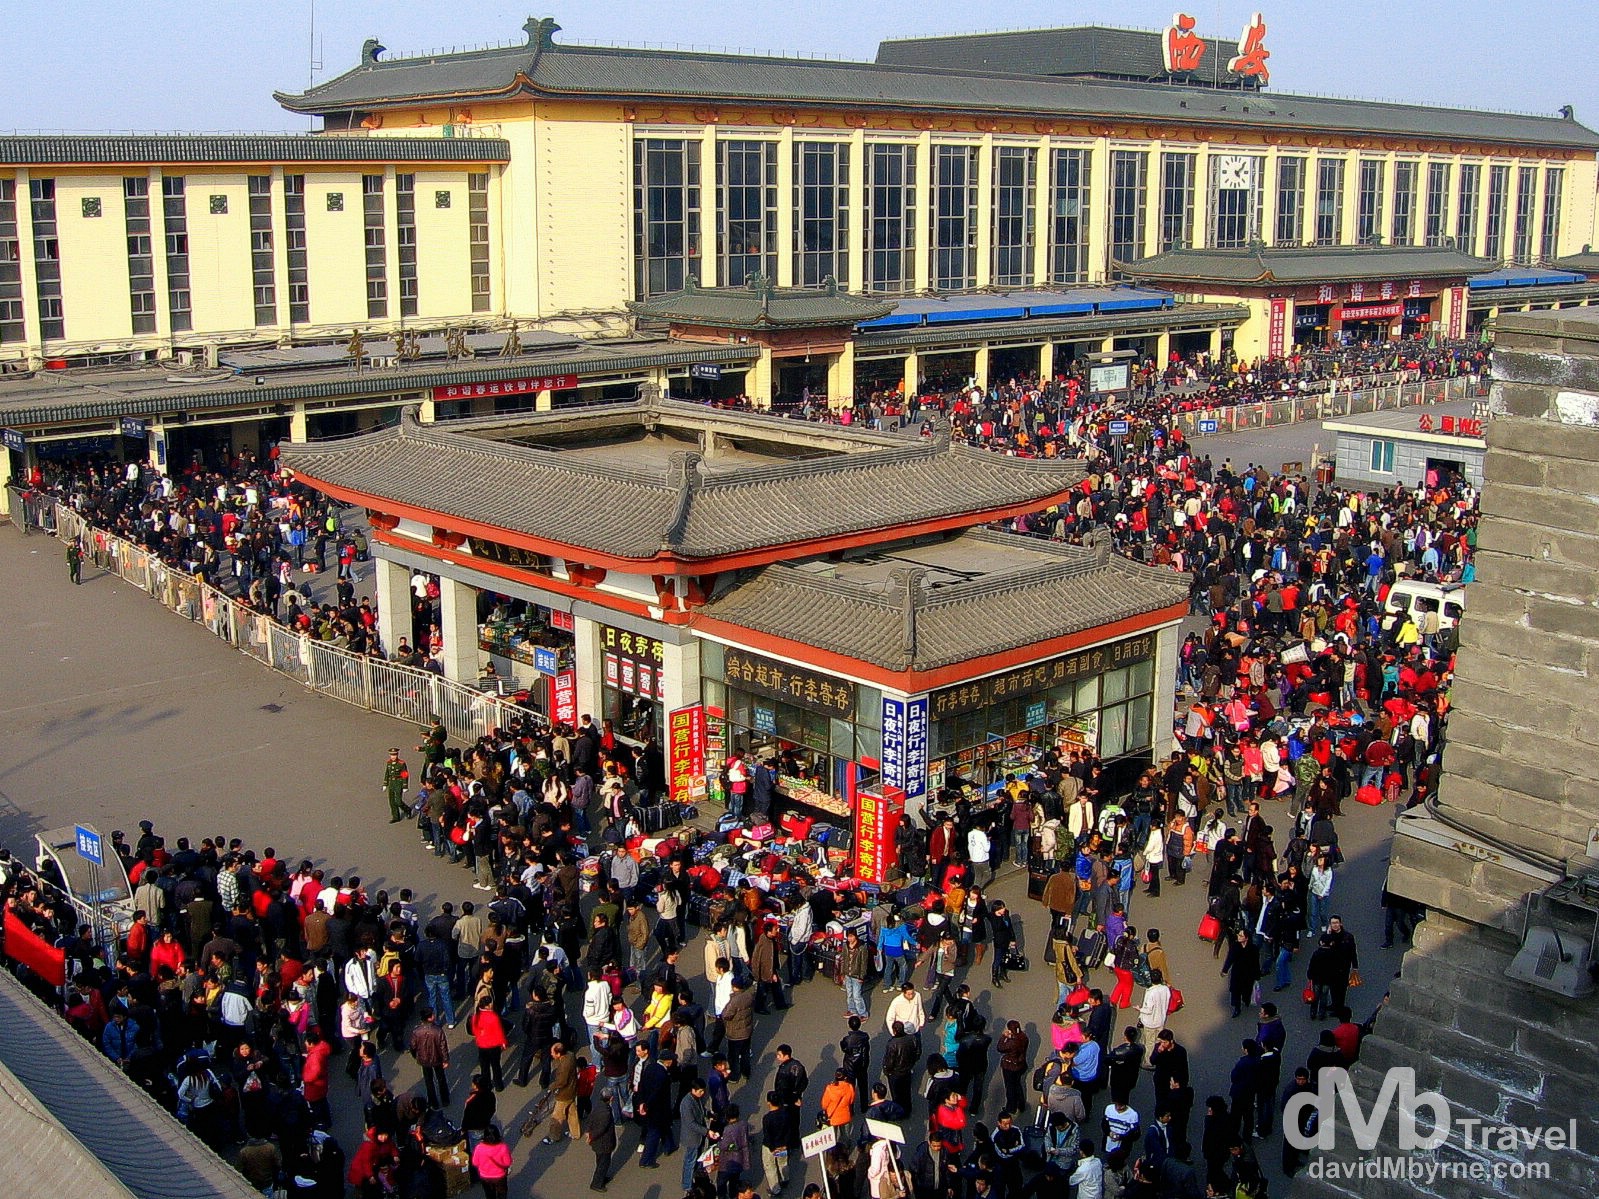 Crowds outside the main train station in Xi'an, Shaanxi Province, China. February 22nd, 2008.